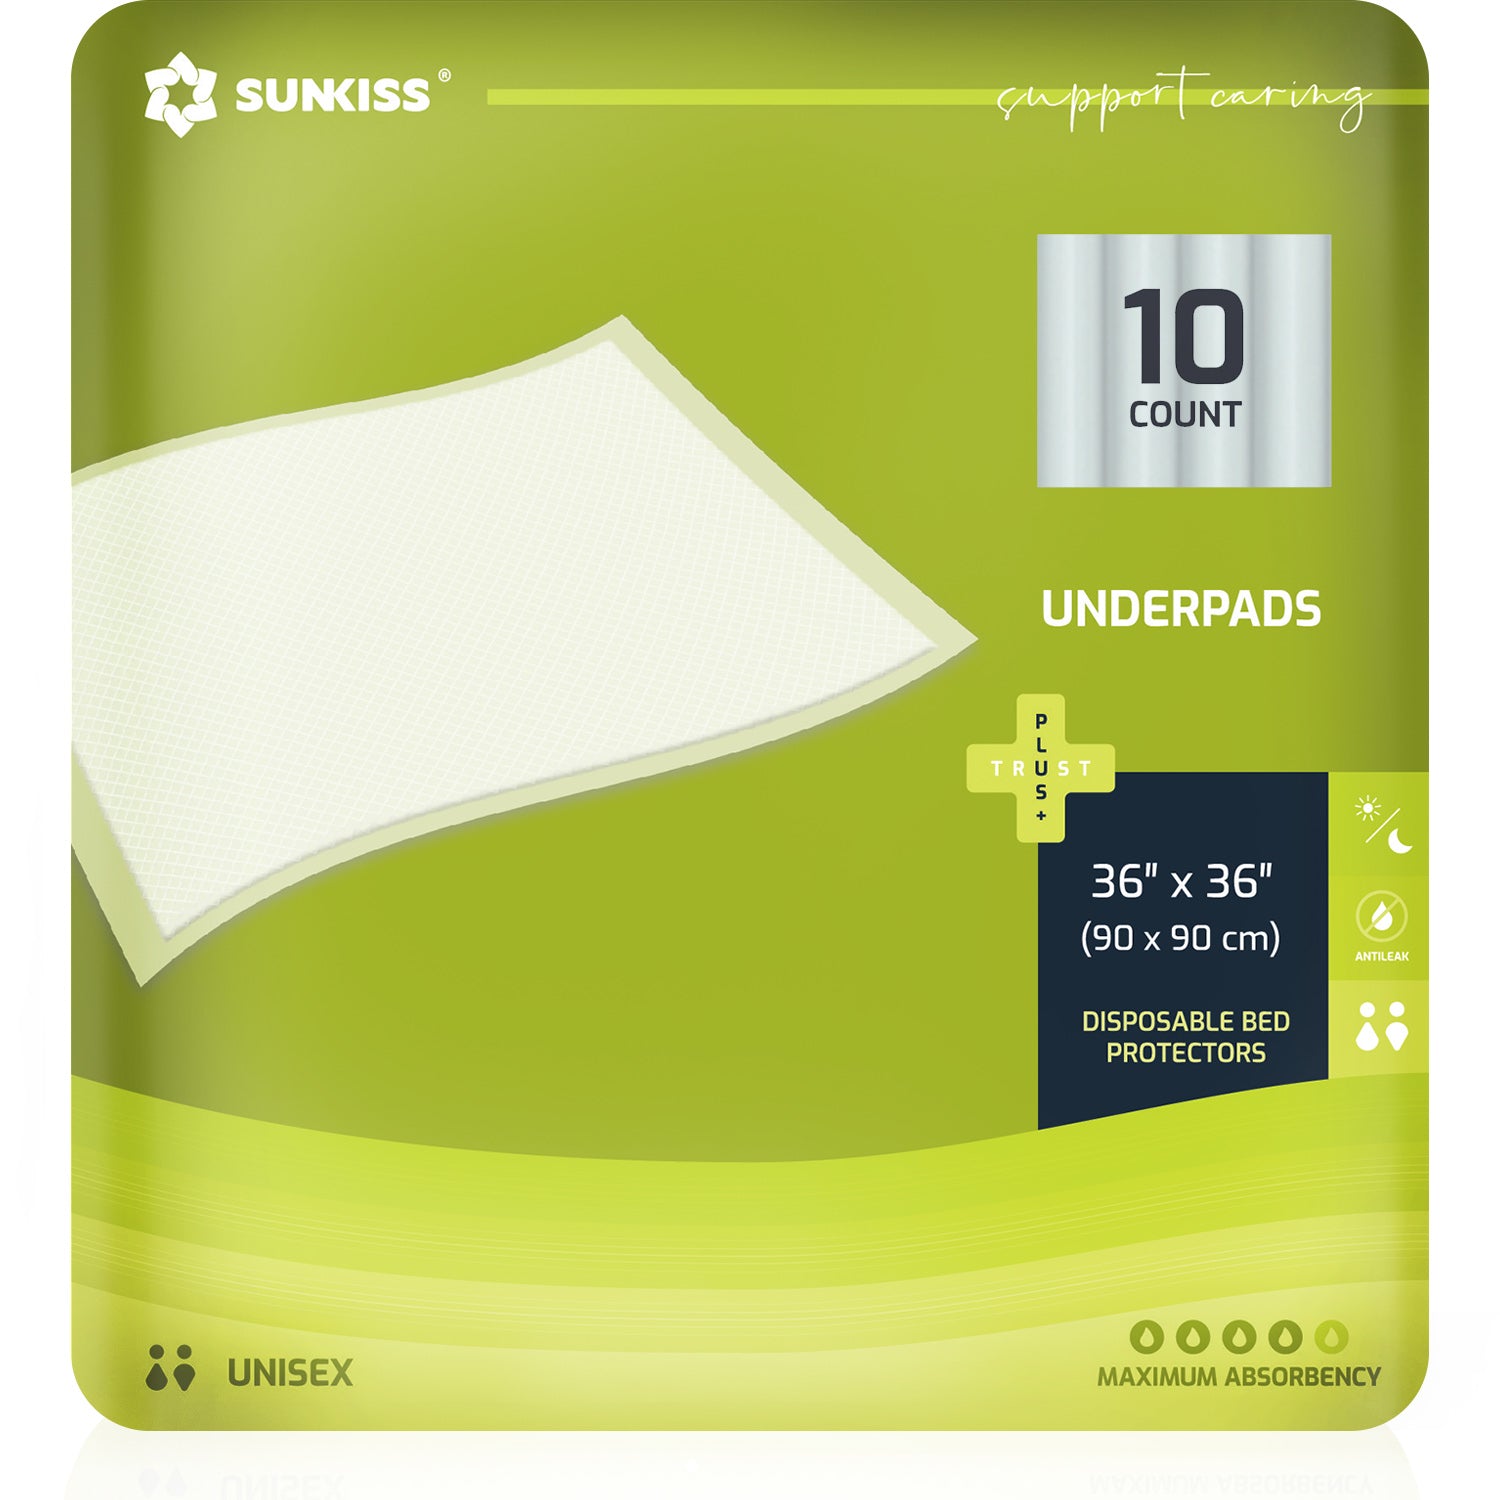 SUNKISS TrustPlus+ 36 x 36 Disposable Incontinence Underpads – SUNKISS  CARE